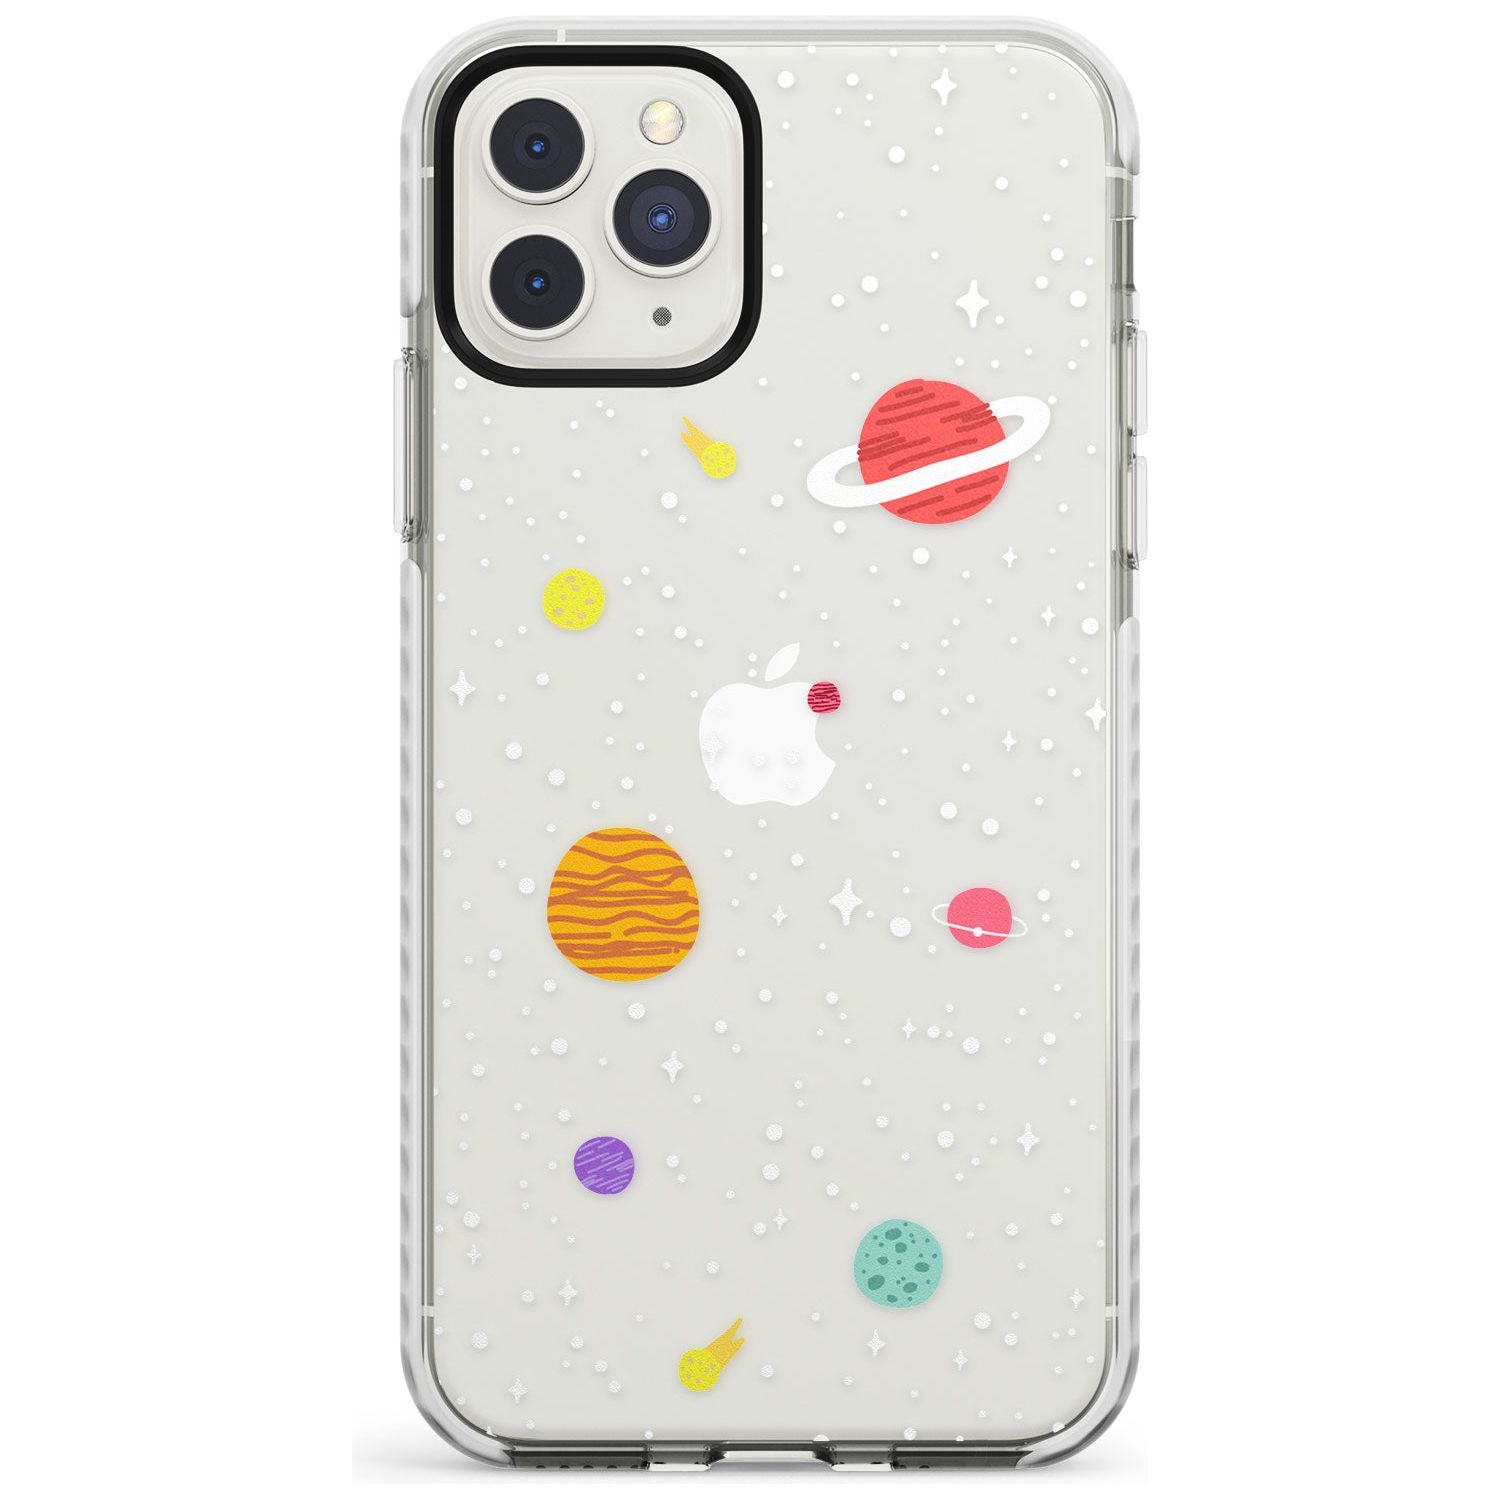 Cute Cartoon Planets (Clear) Impact Phone Case for iPhone 11 Pro Max